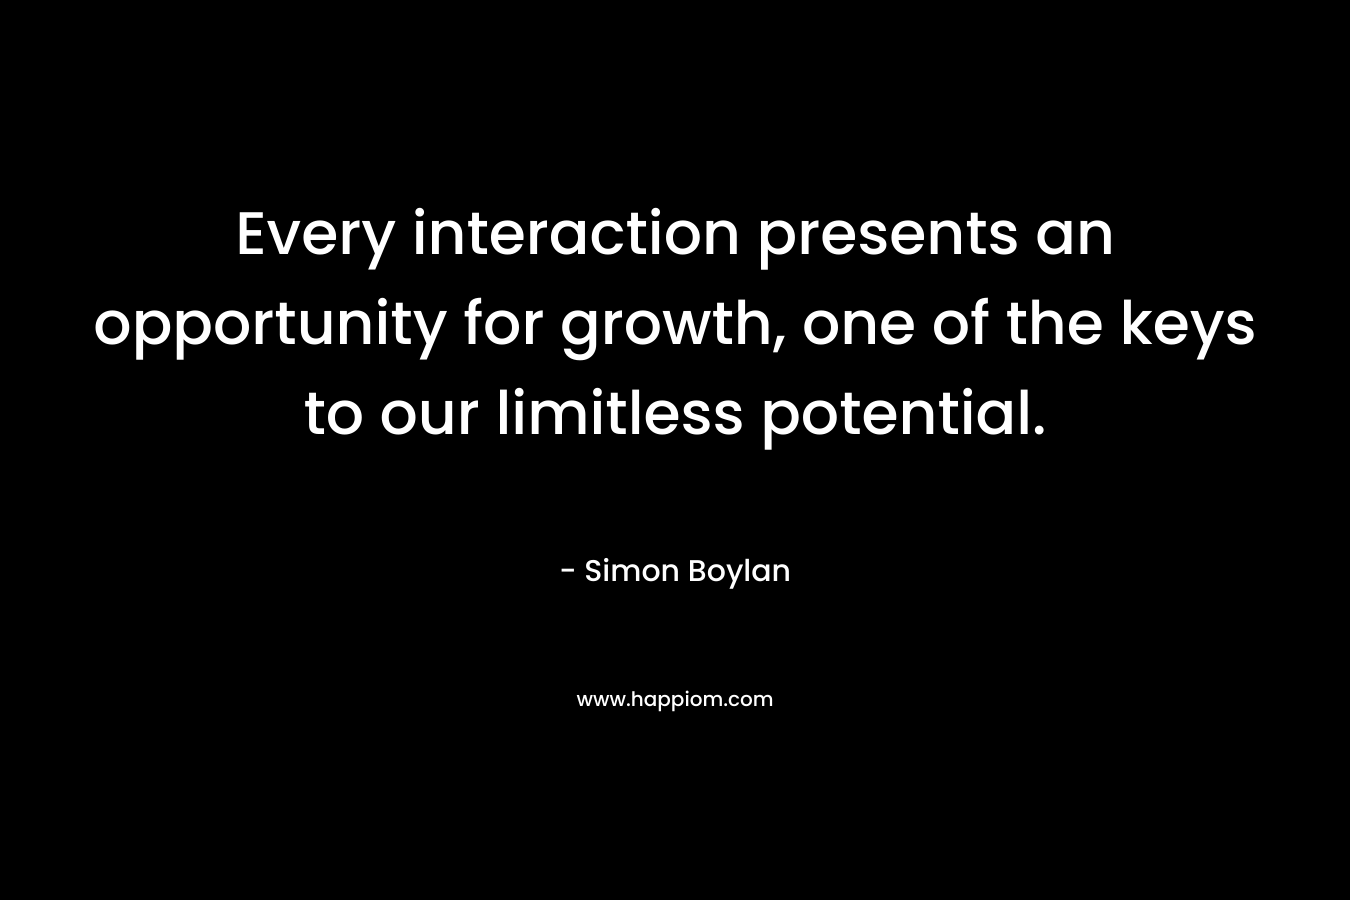 Every interaction presents an opportunity for growth, one of the keys to our limitless potential.